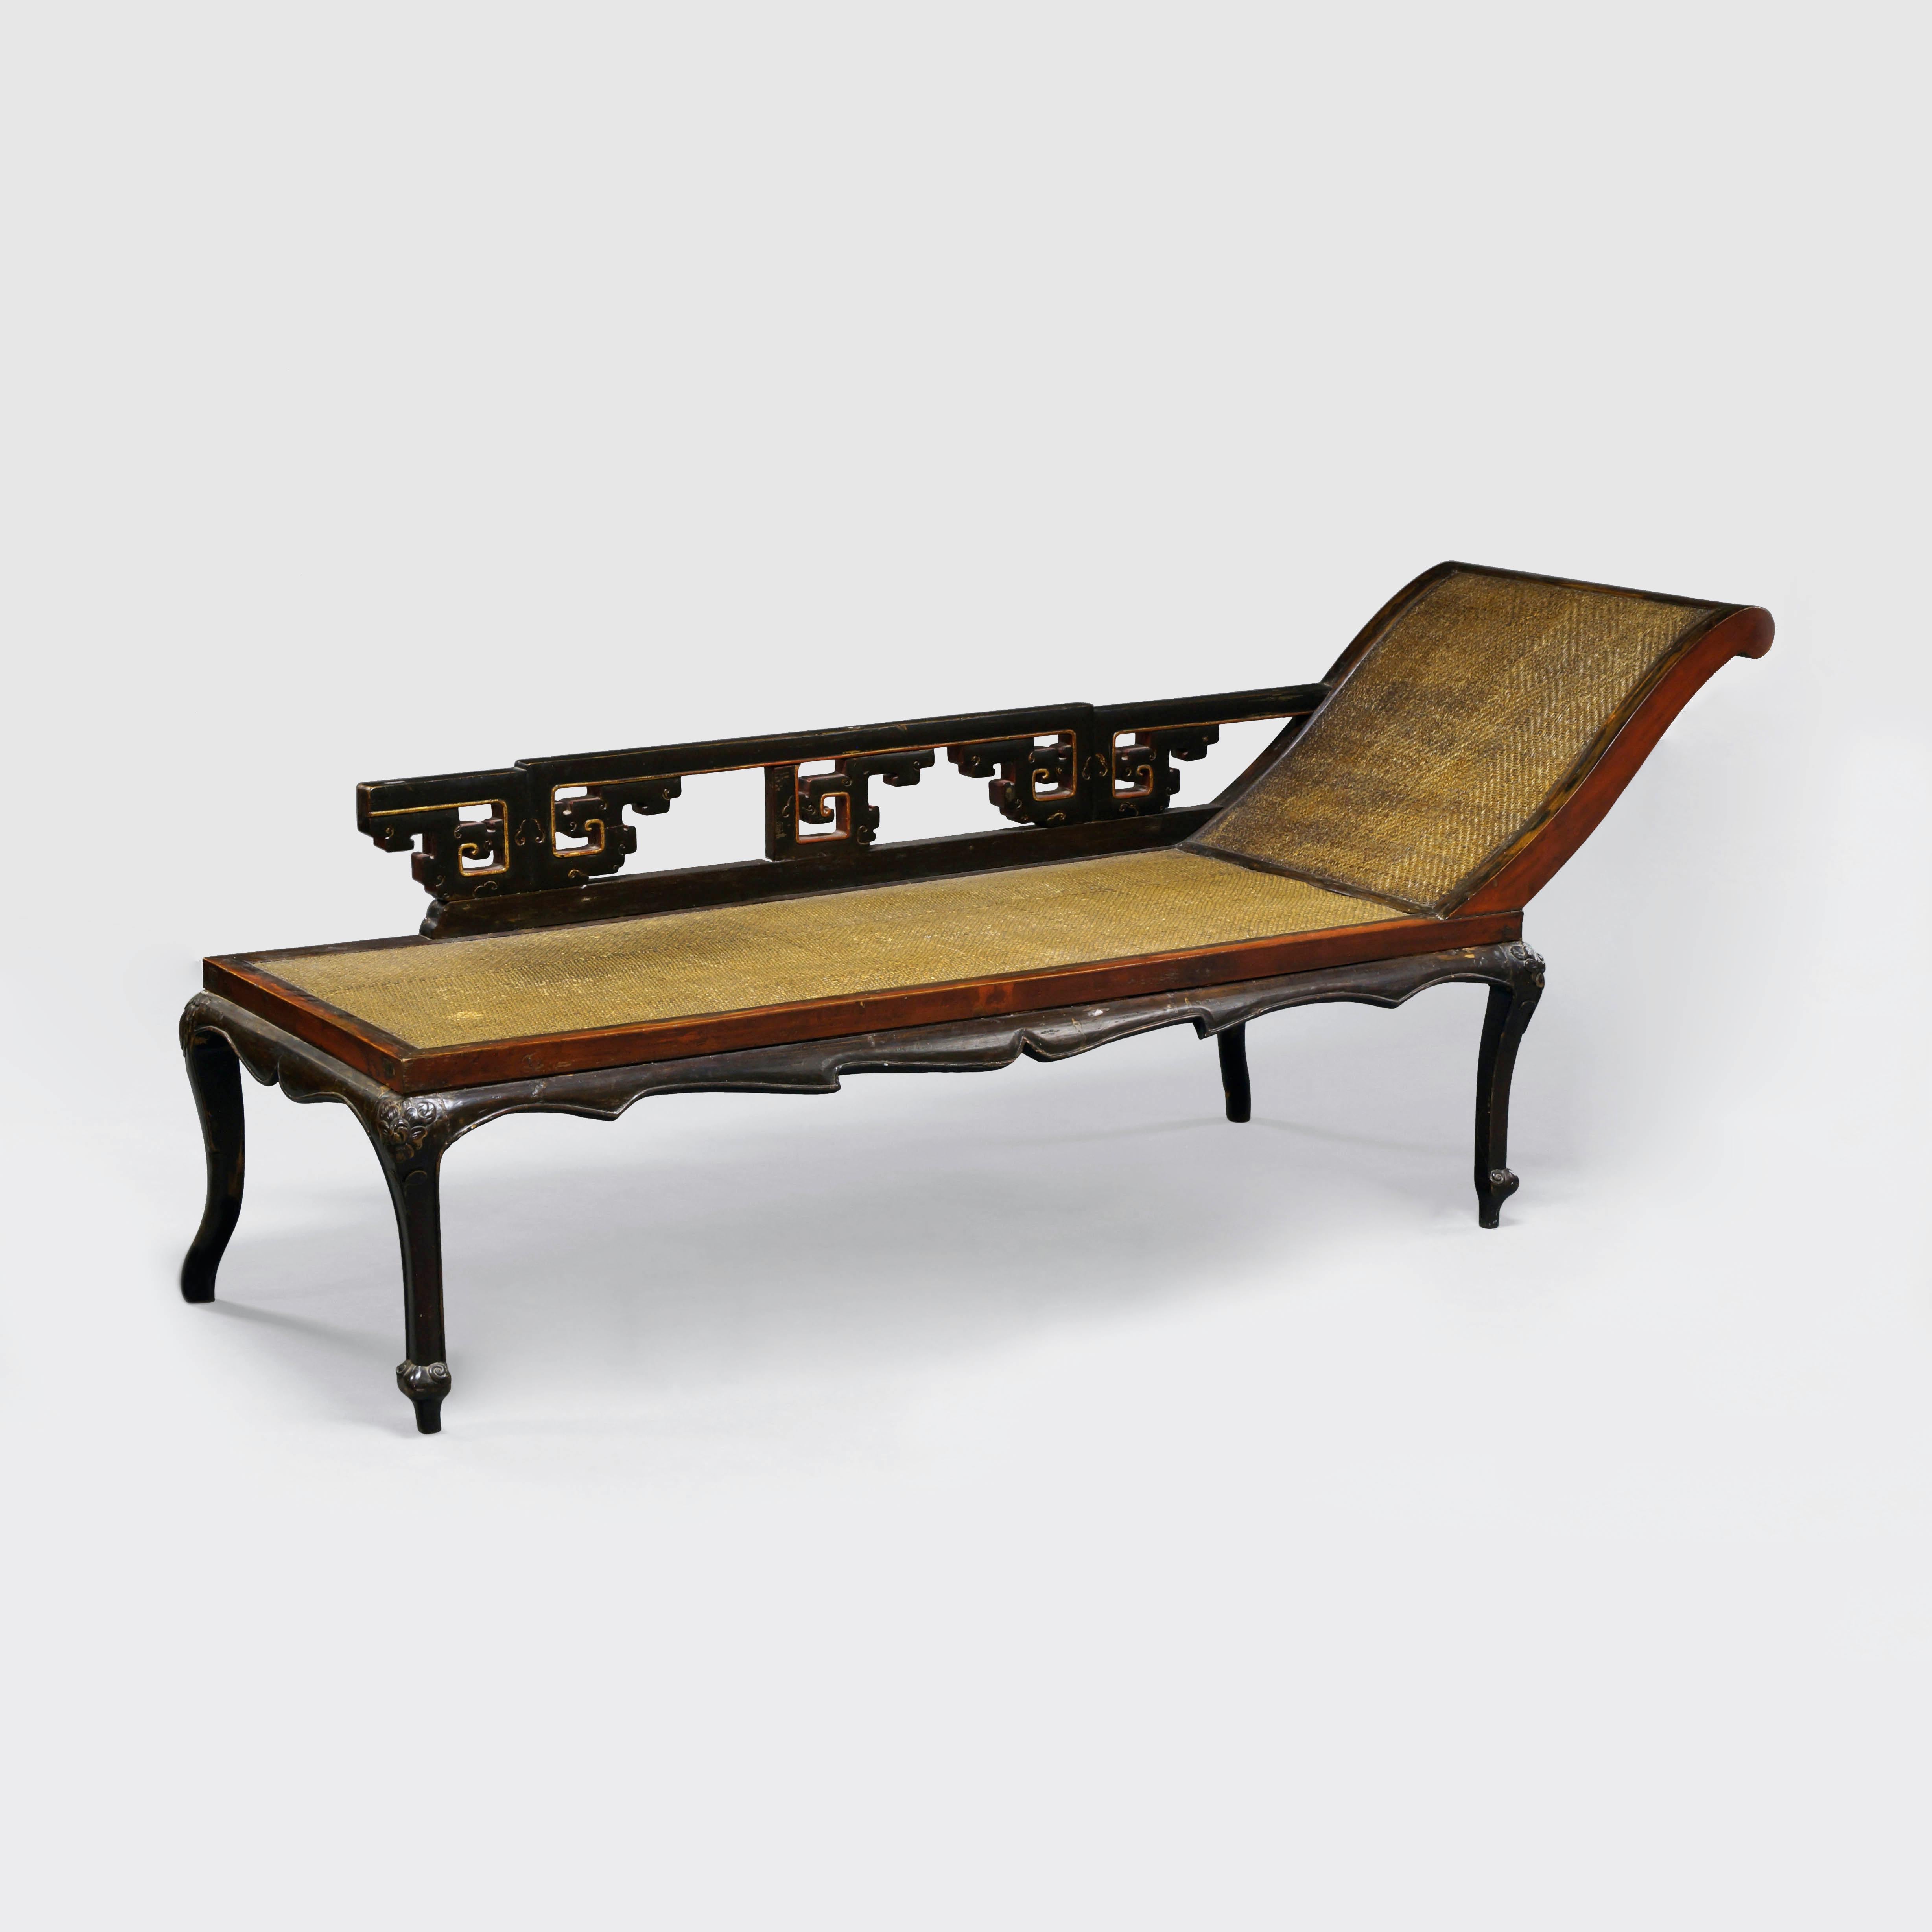 
Late 19th to early 20th century Chinese daybed with soft cane top that epitomises the elegance of Jiangsu furniture, which was highly rated in ancient China. Elegantly proportioned, it has rounded corners with archaic motifs to back on cabriole